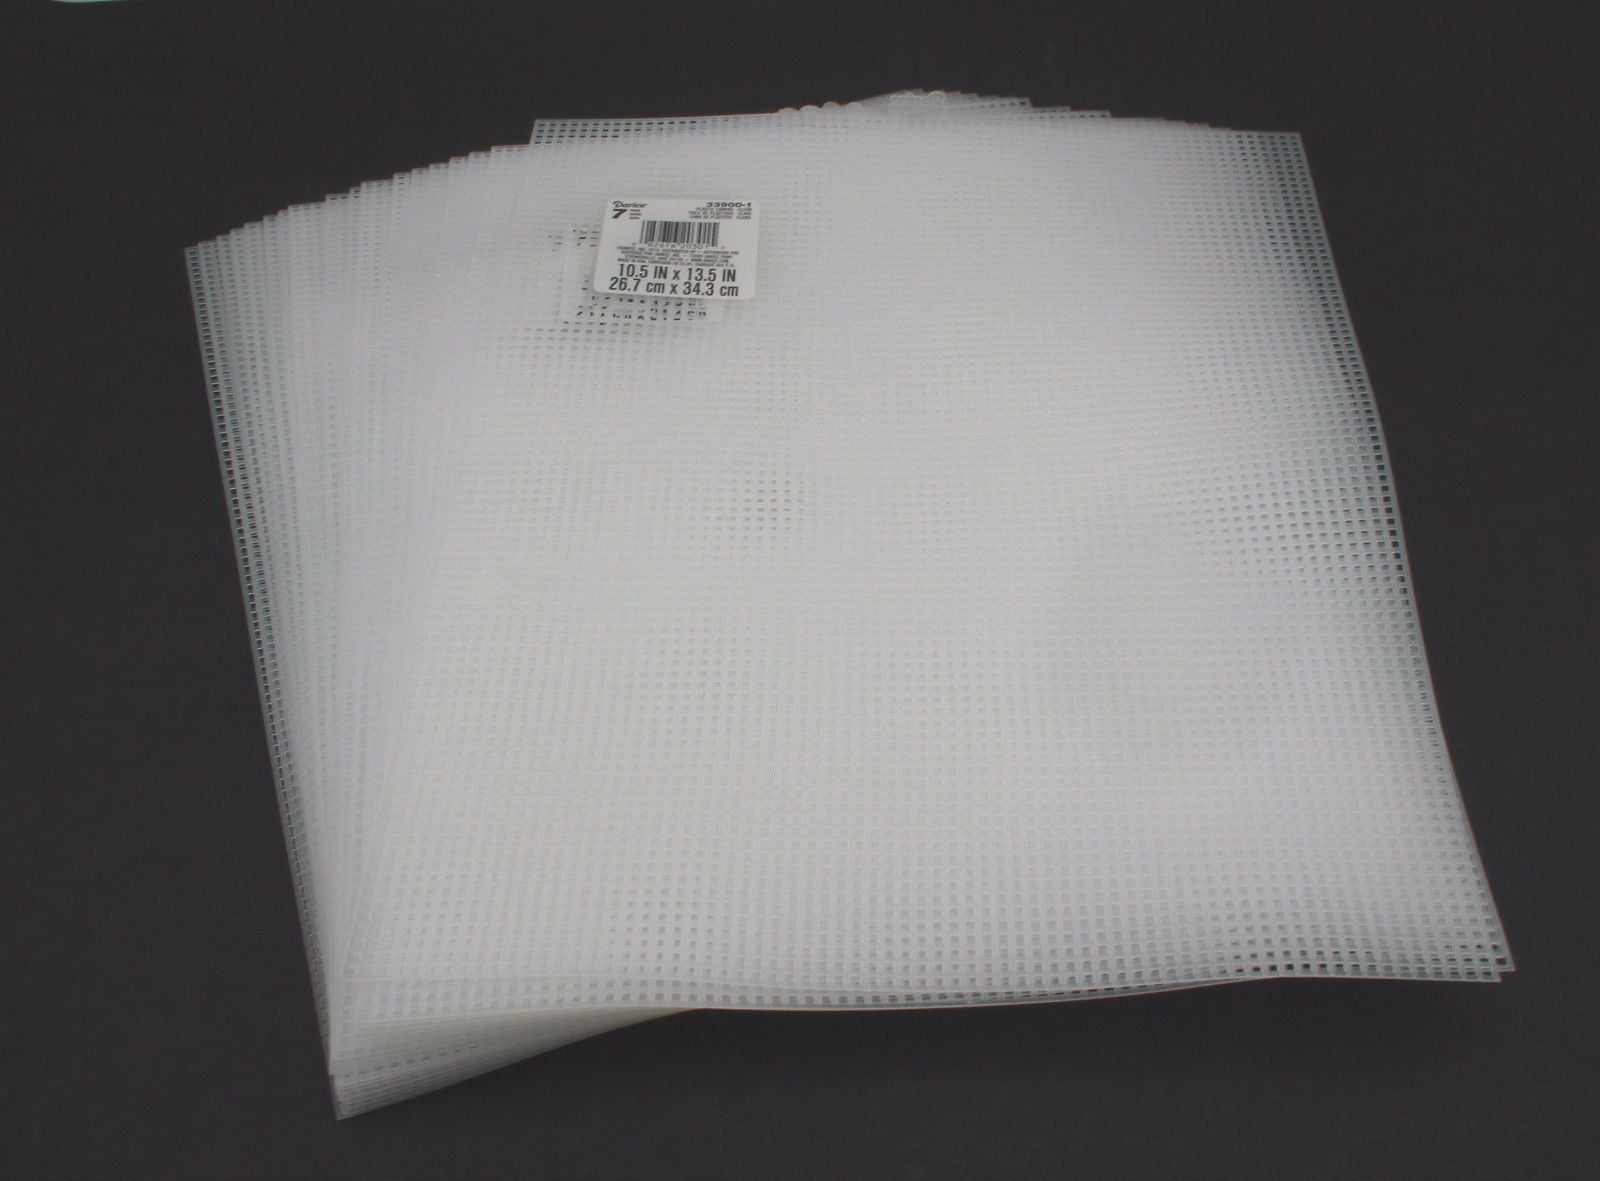 Lot 7-Mesh Plastic Canvas- 50 Sheets- 10.5 x 13.5 inch Darice New, Clear